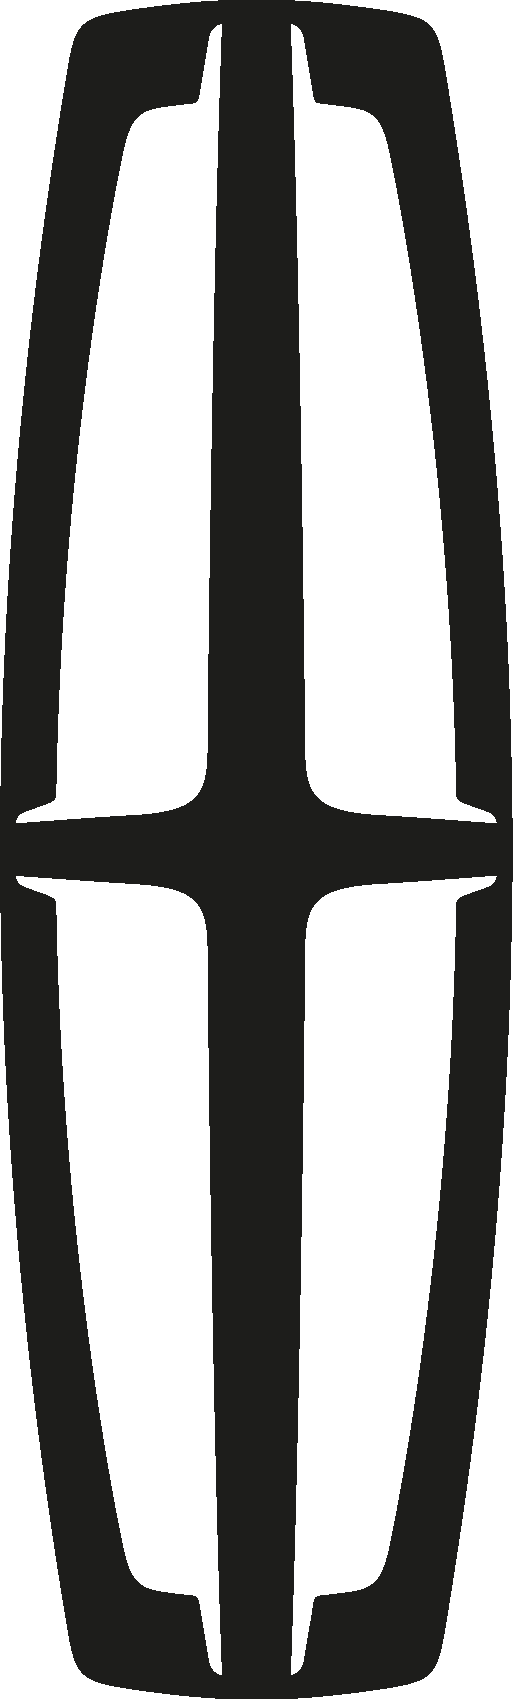 Lincoln Automobile Logo png